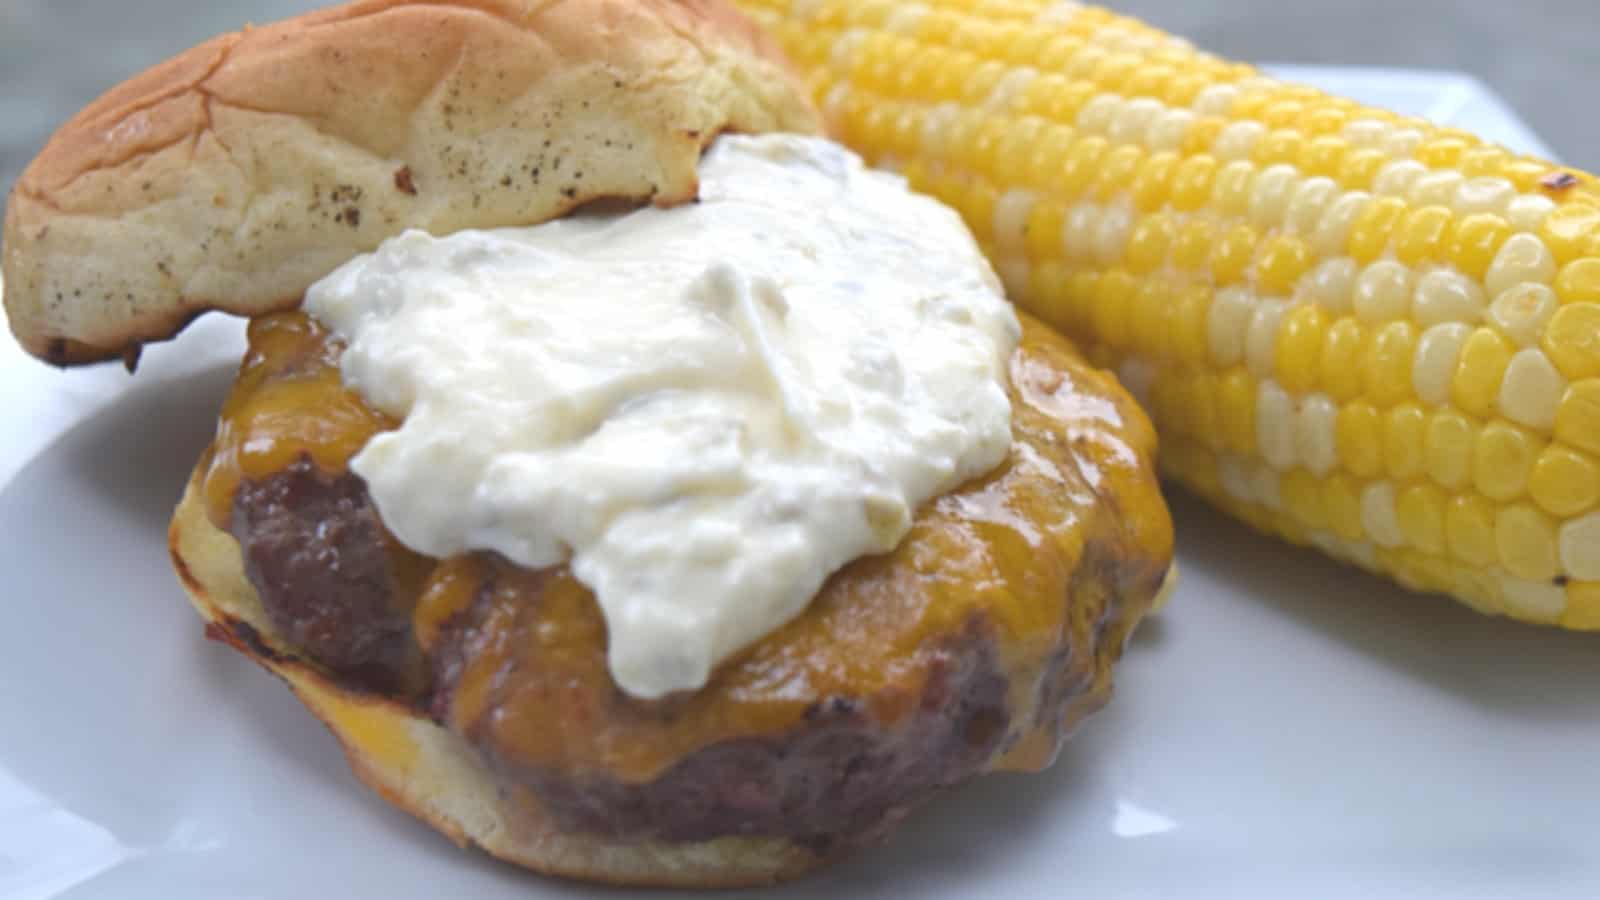 Image shows a Chipotle burger with grilled corn in the background.